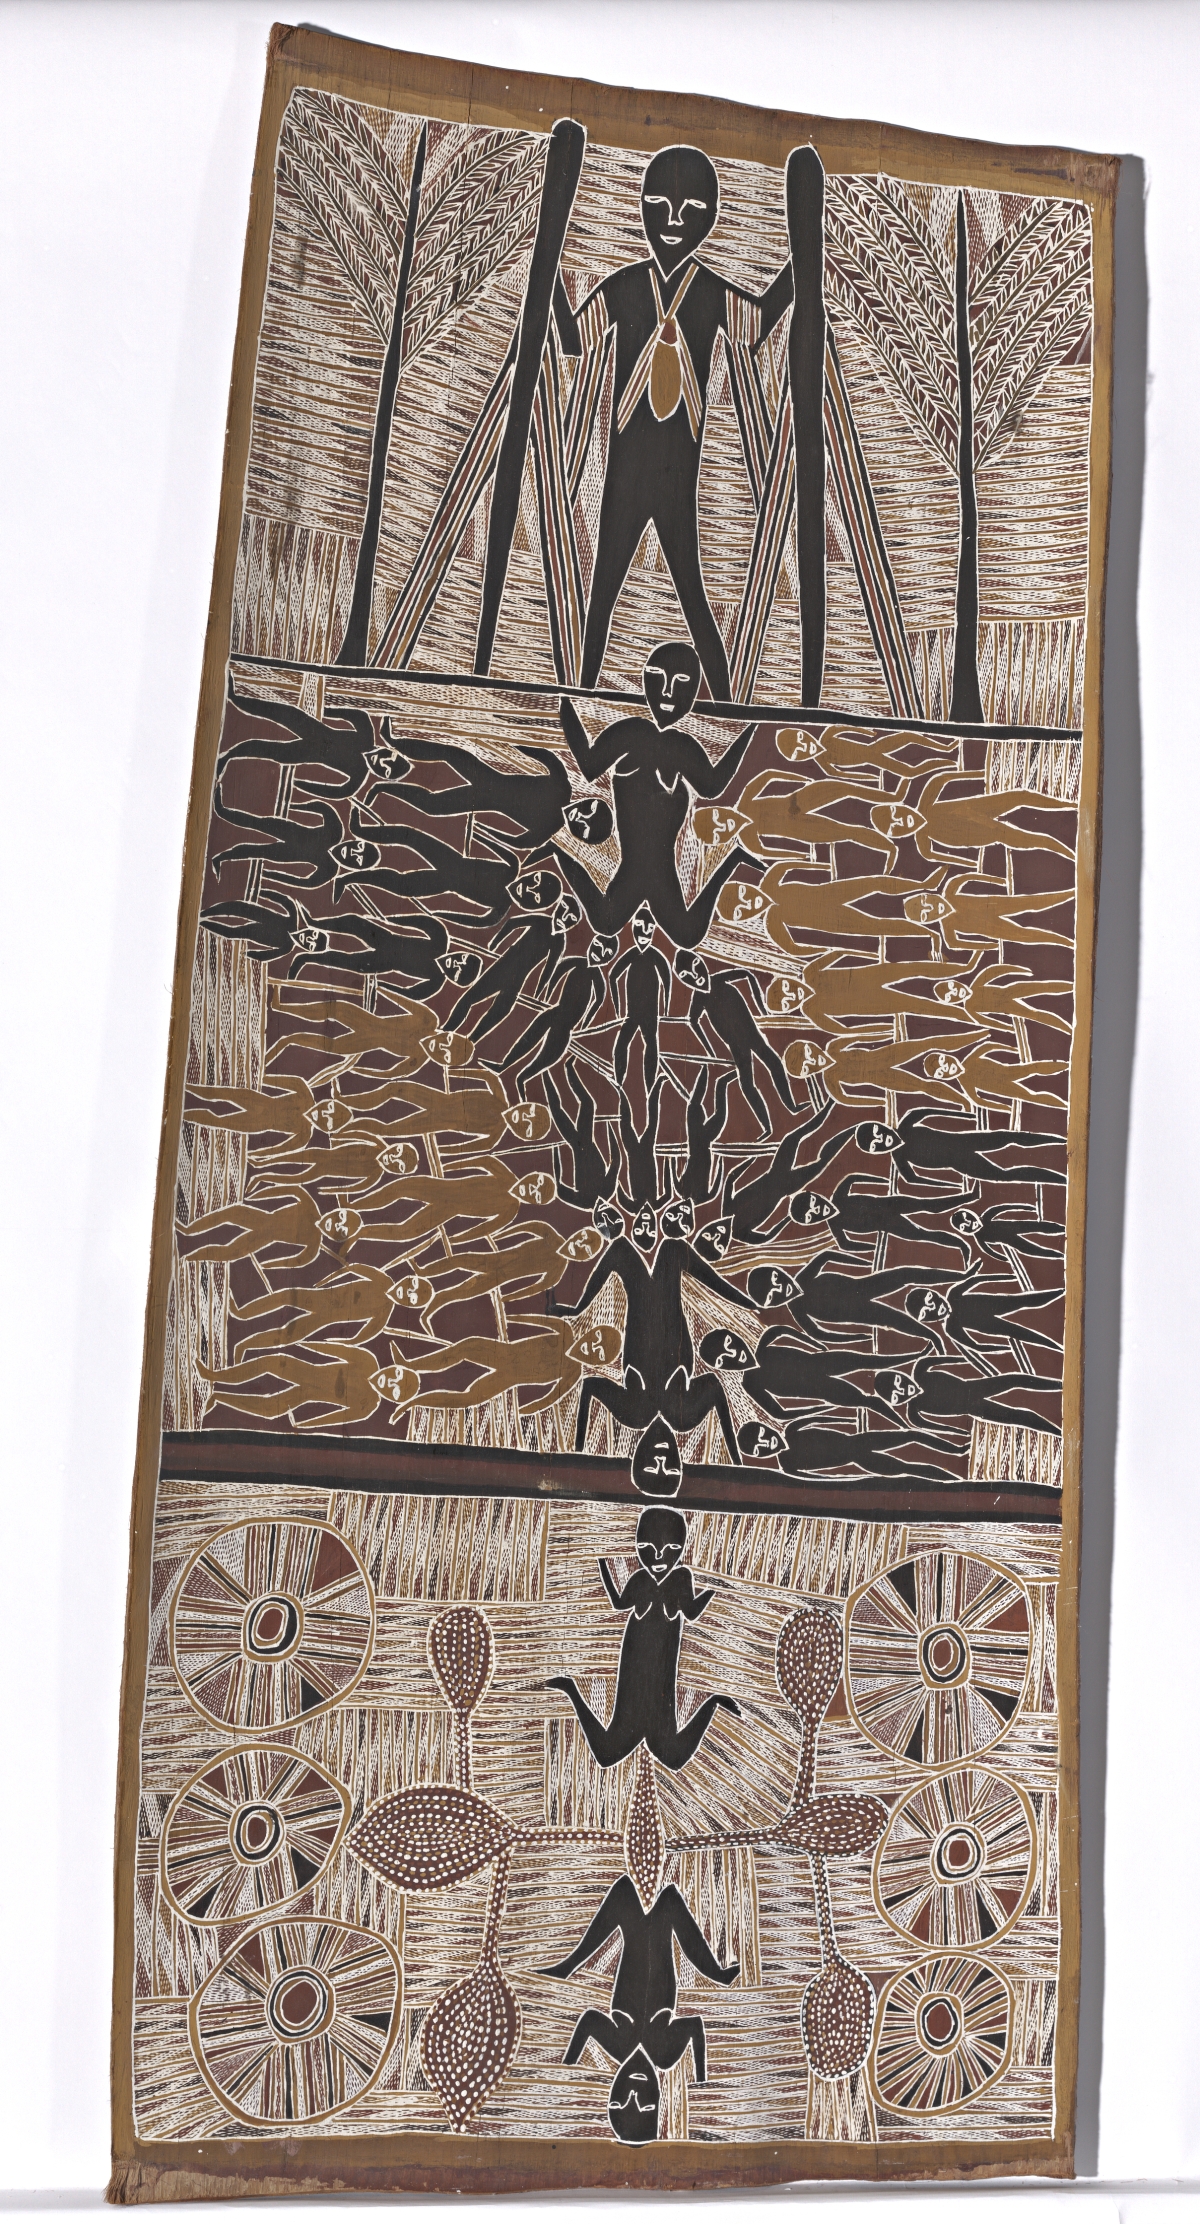 Vertical painting with three boxy sections. In the middle, figures descend in a single line from the top to the bottom in of the painting. There are multiple figures in the middle portion. The figures and intricate designs of possible abstracted trees and other objects are painted in various shades of brown and ocher; white is used for the background and outlining of figures. 